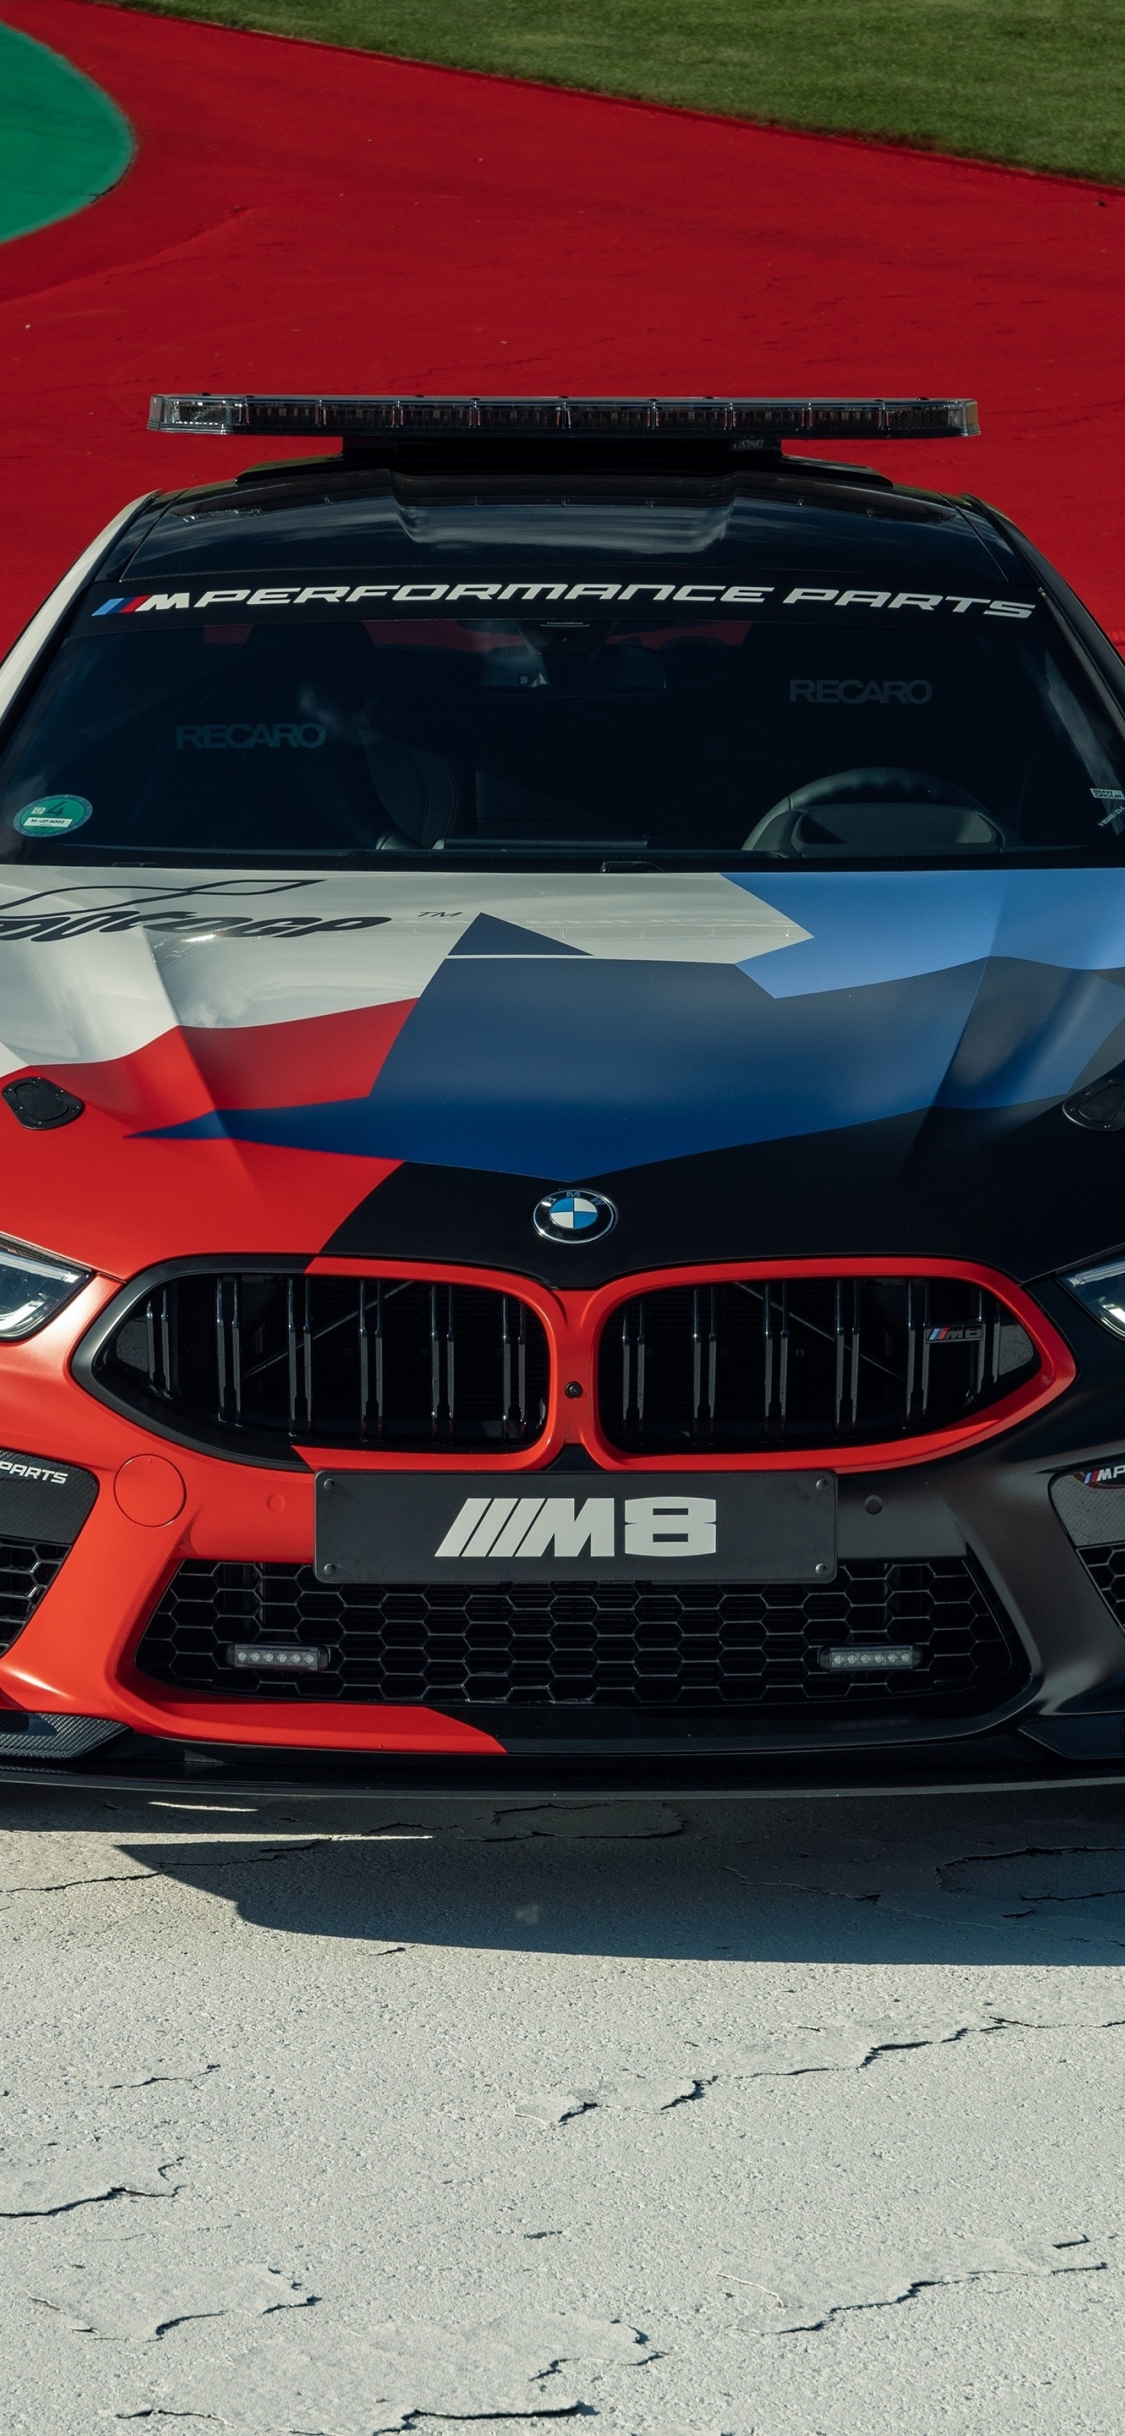 Download 1125x2436 Wallpaper Bmw M8 Competition Gran Coupe Motogp Car Iphone X 1125x2436 Hd Image Background